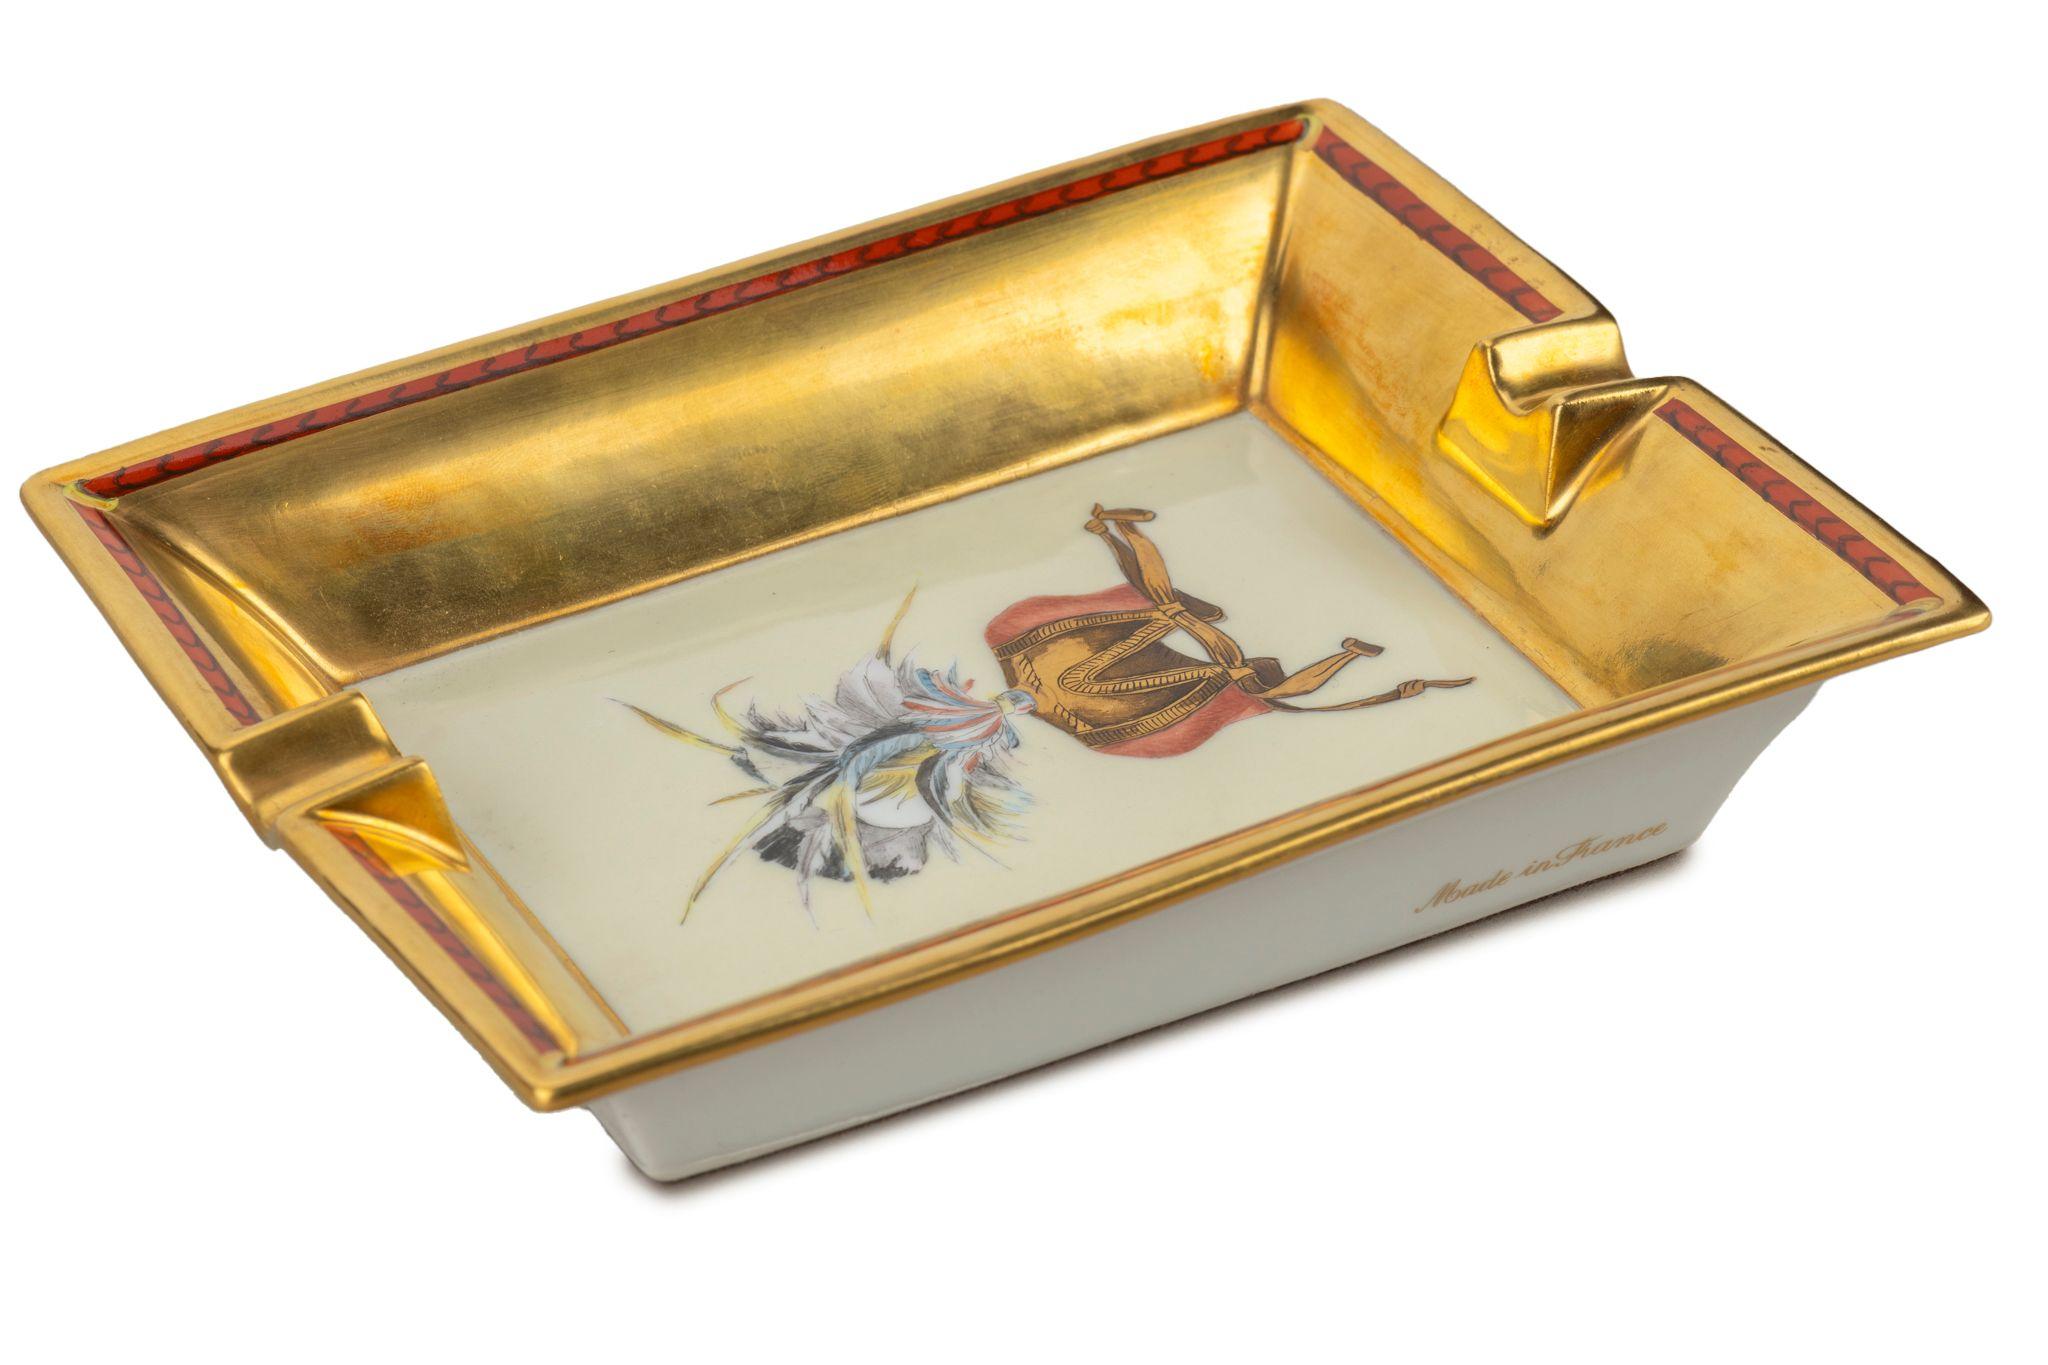 Hermès collectible 24kt gold leaf porcelain astray, mint condition with bottom suede.